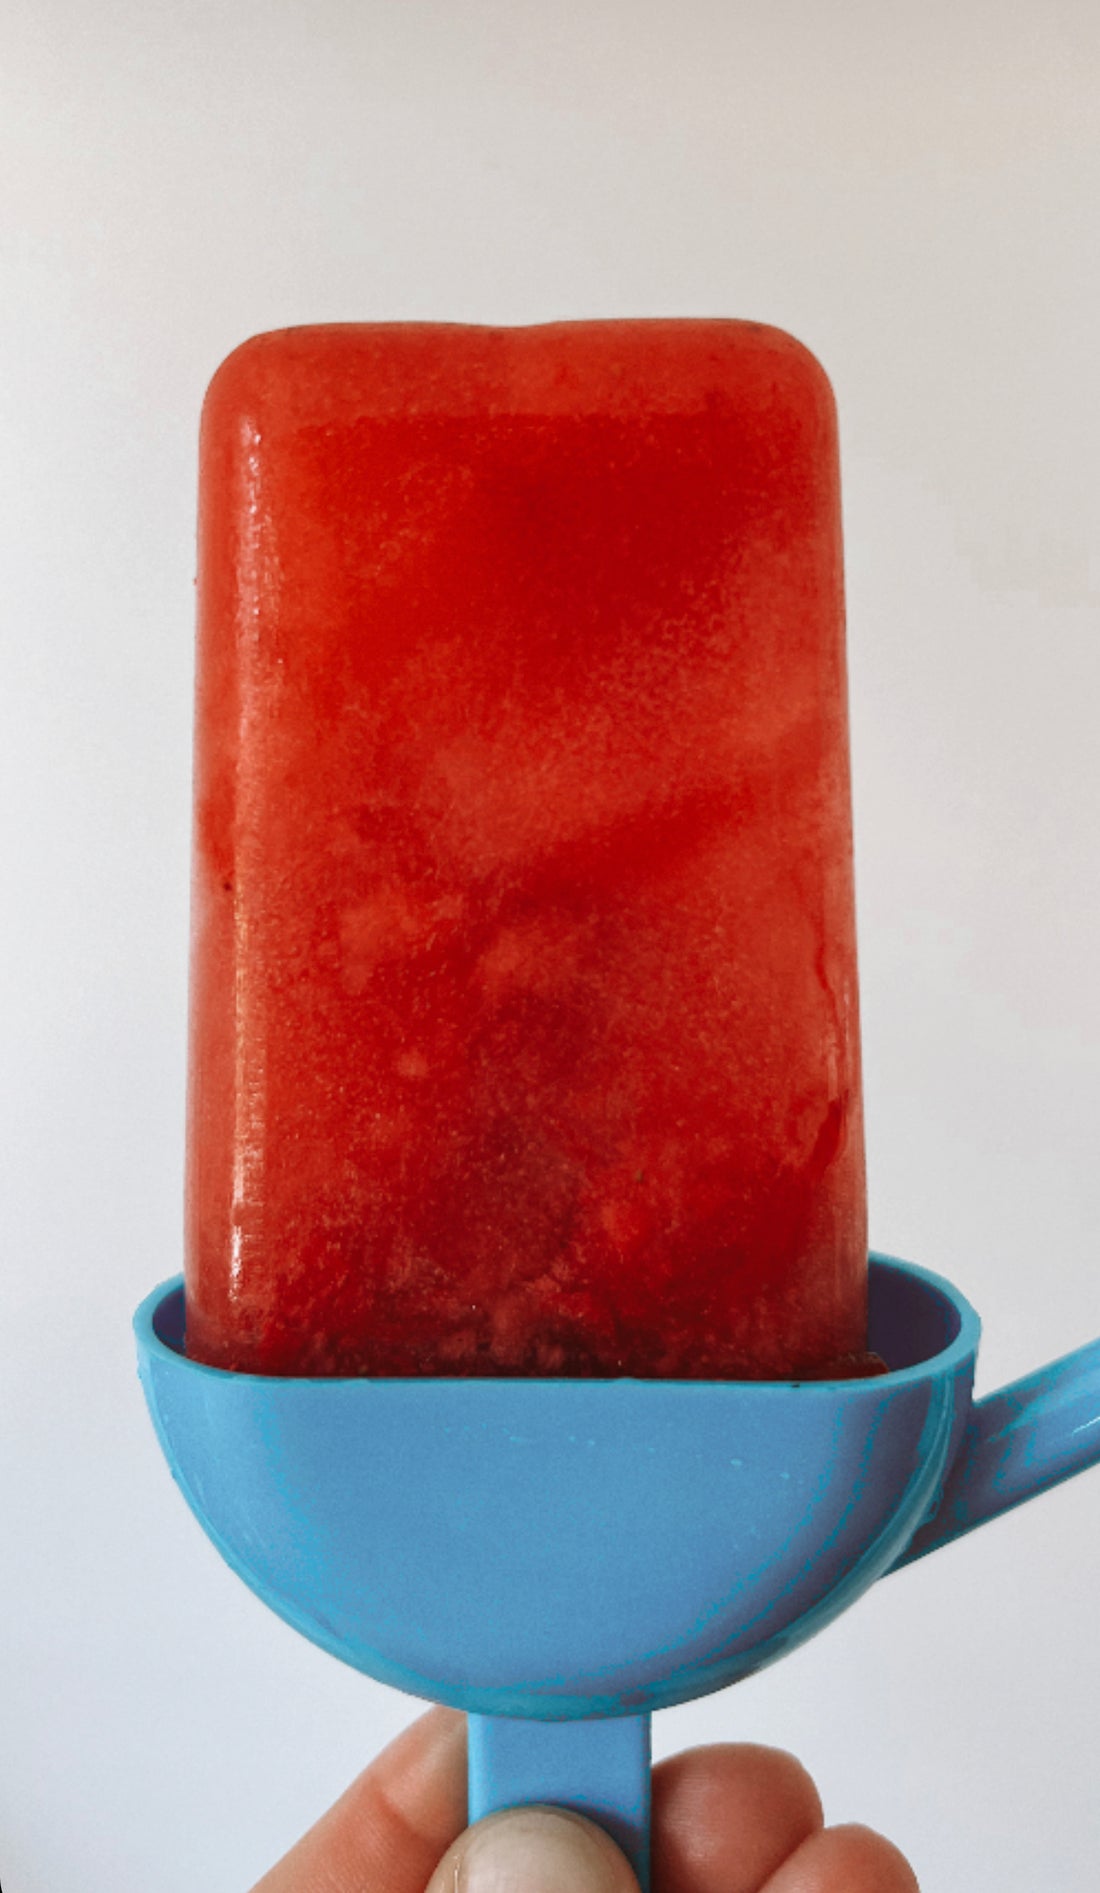 homemade popsicle made from tea and fruit